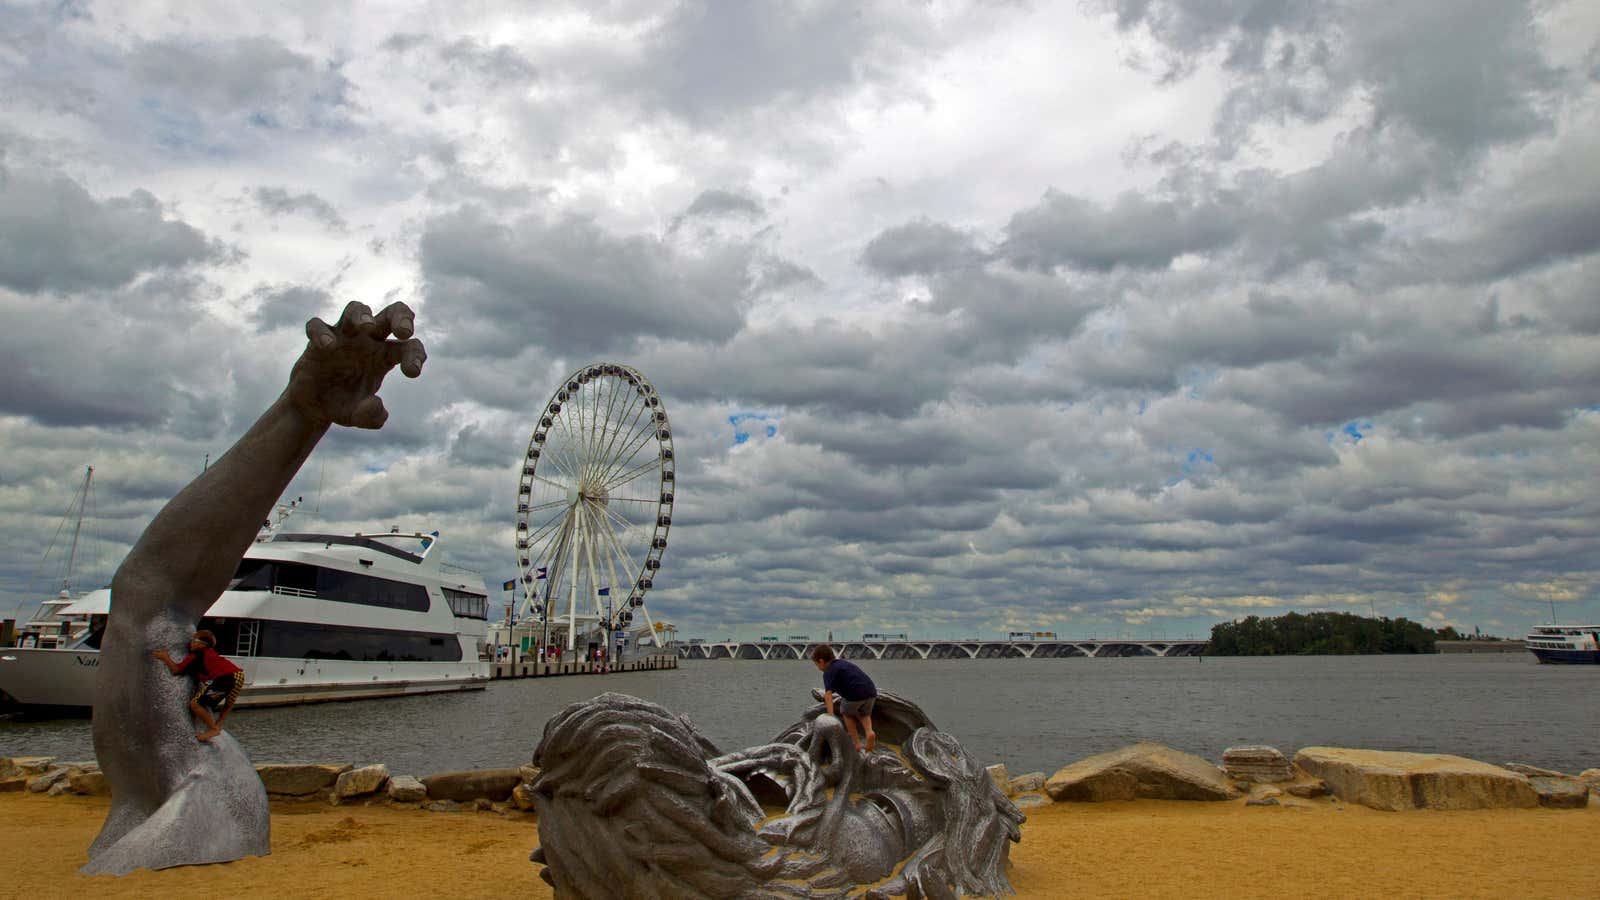 A man inspired by ISIS  allegedly planned to drive a van into a National Harbor crowd.